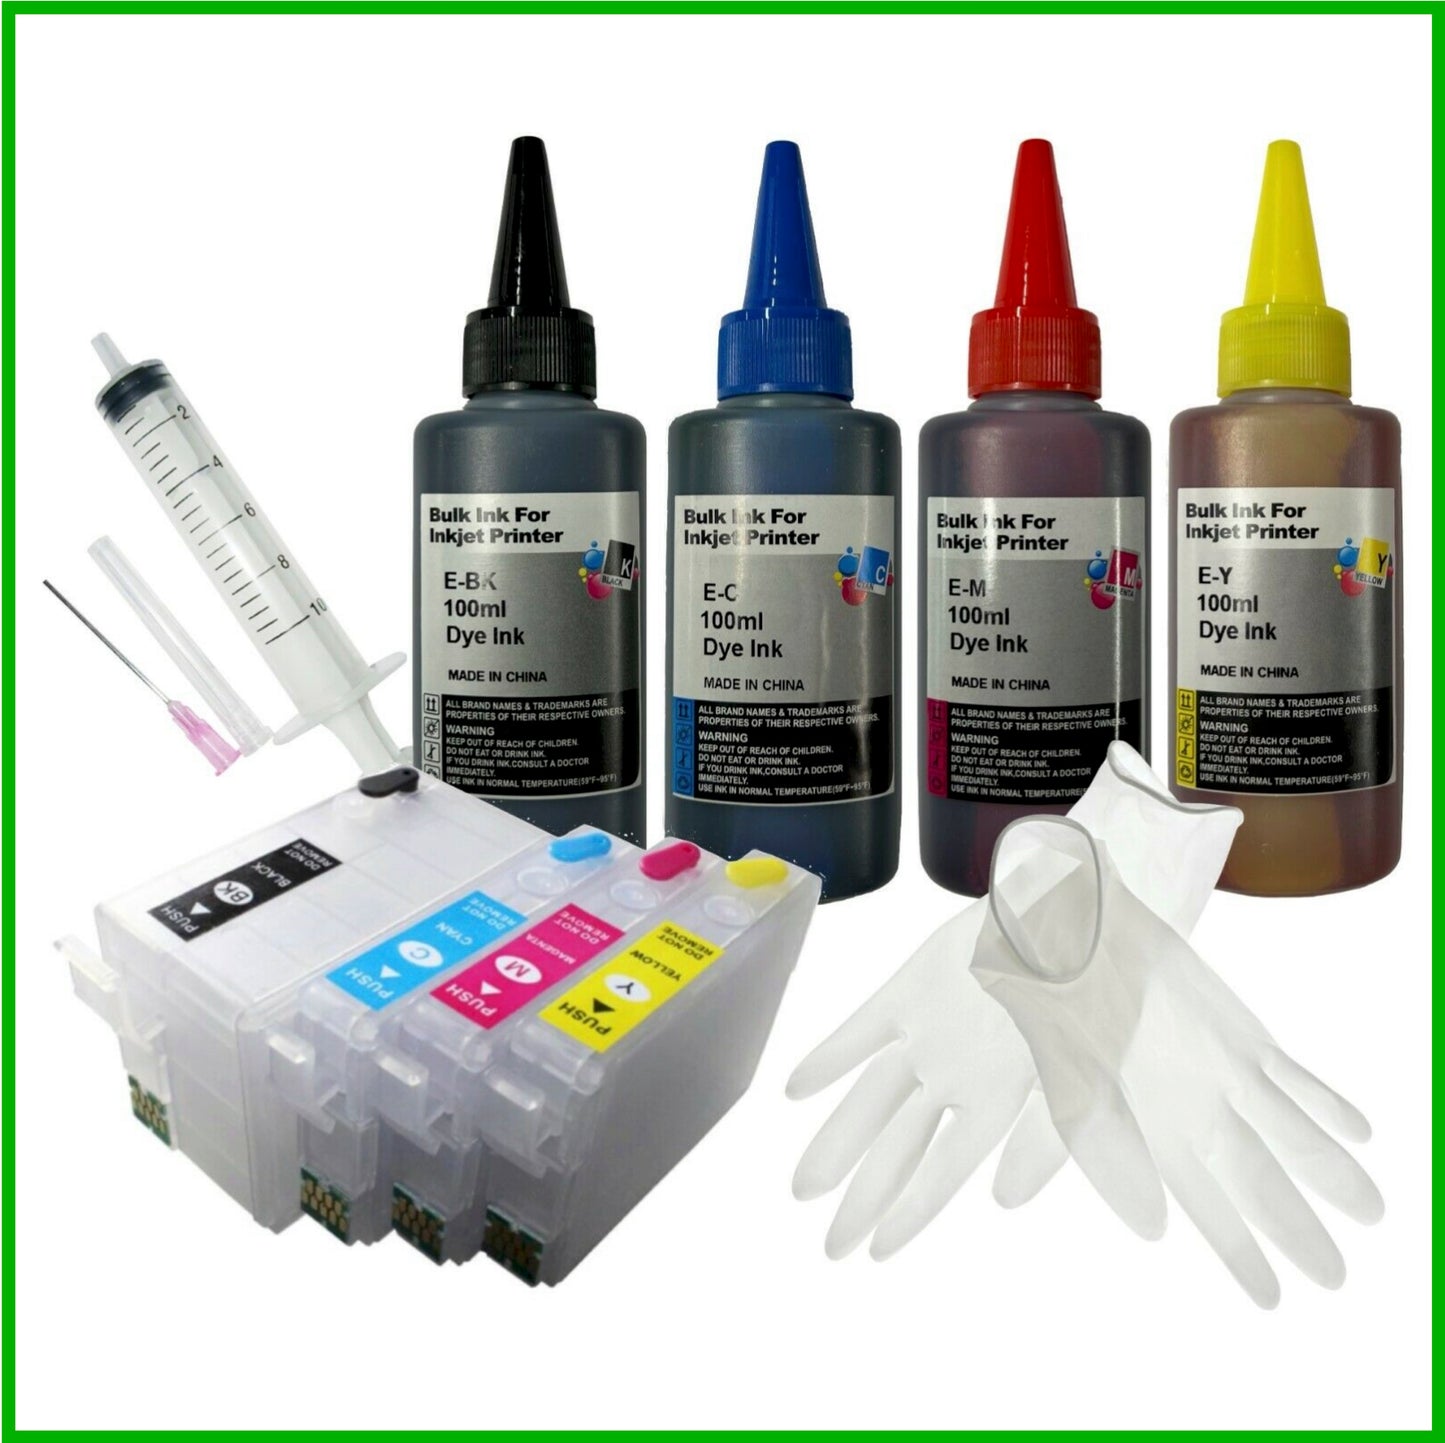 Refill Starter Kit - 27XL Cartridges with ARC Chip & Ink for Epson Workforce